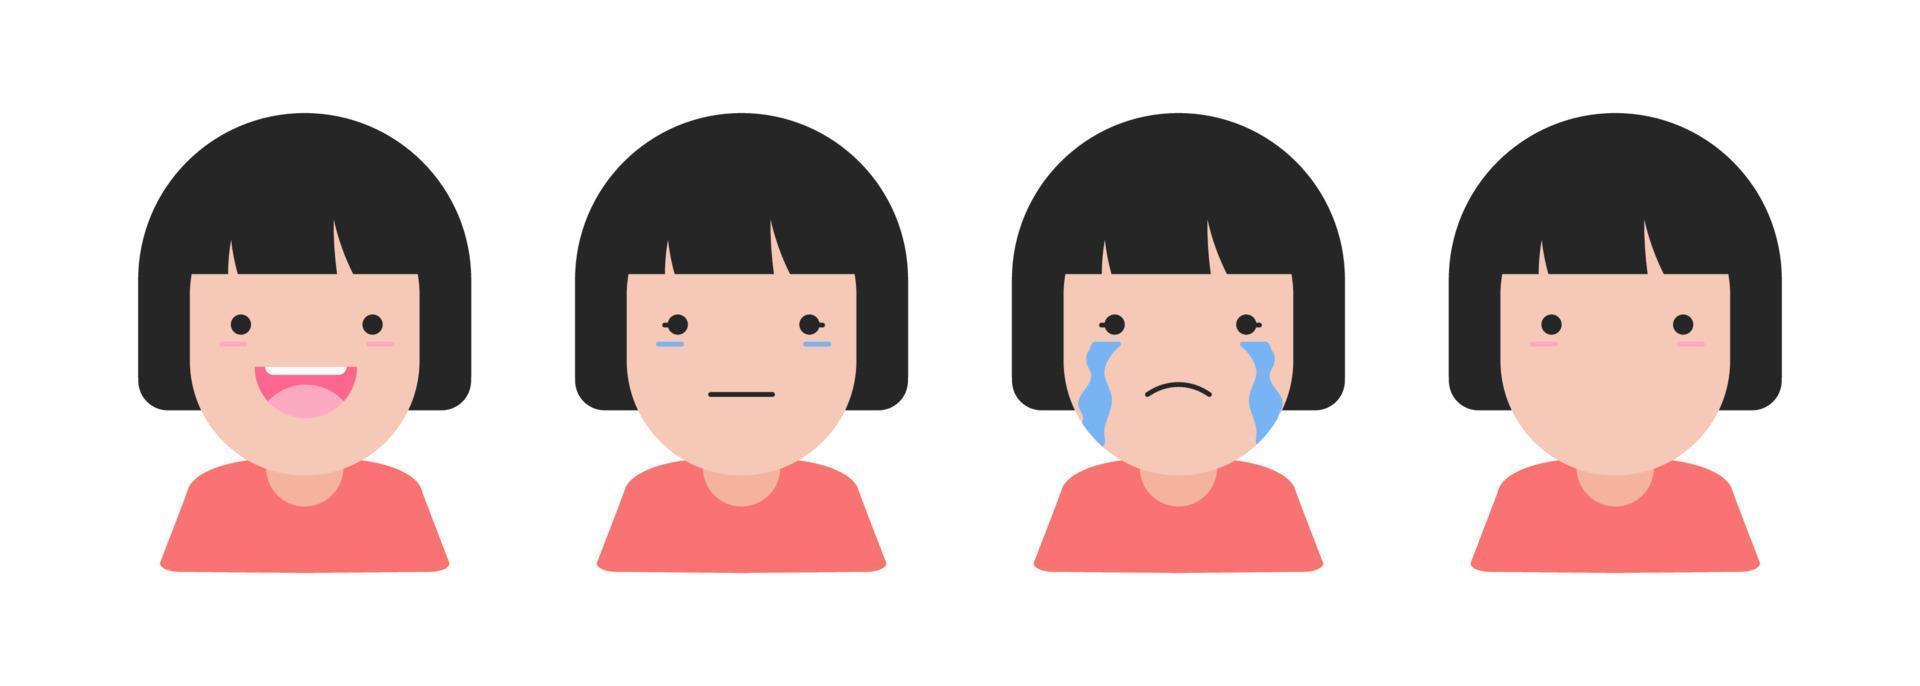 Set of emotions. Young cute girl shows different emotions. Sad, surprised, happy, laughing. Flat style on white background. Cartoon. Vector illustration